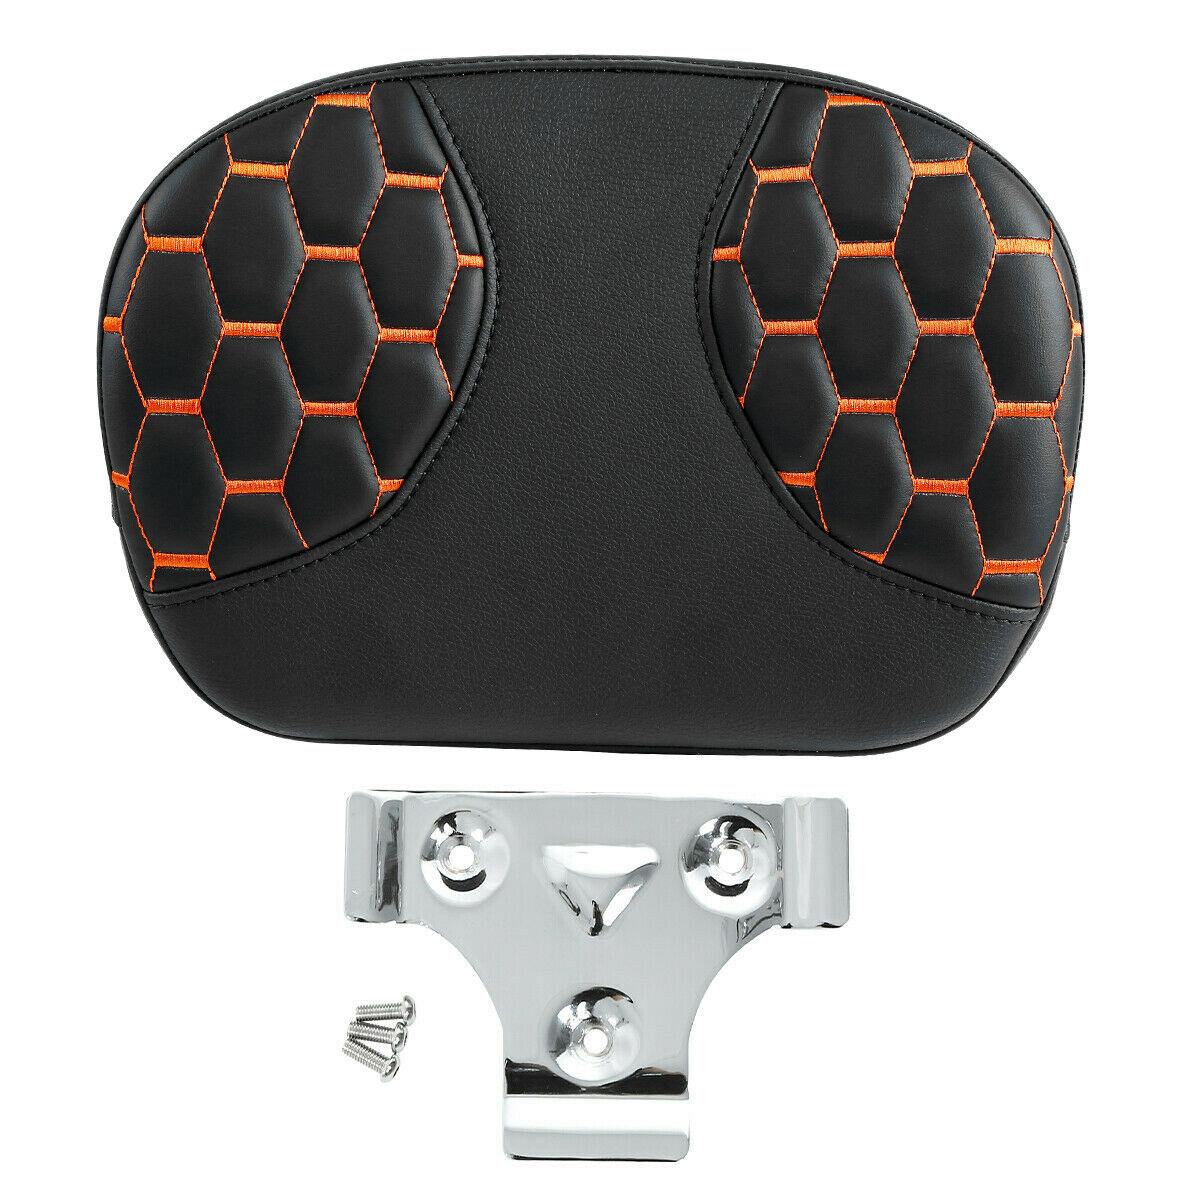 Passenger Sissy Bar Backrest Pad Fit For Harley Touring Electra Road Glide King - Moto Life Products